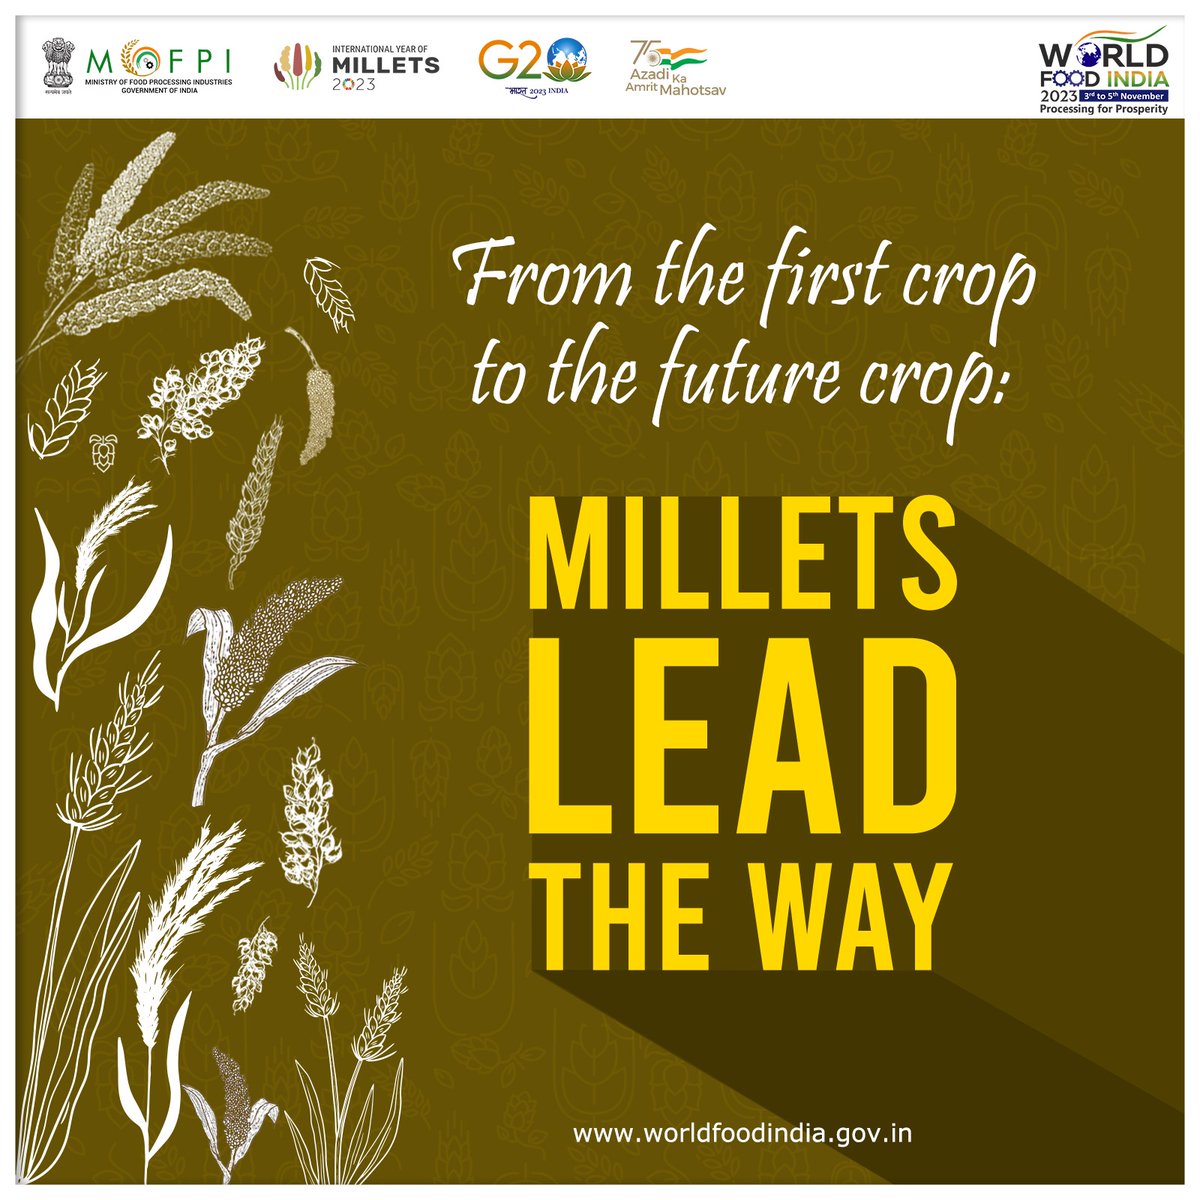 From the ancient past to the future, millets lead the way as the original choice for better production, better nutrition, better environment and a better life.

#WorldFoodIndia2023 #WFI2023 #MOFPI #millets #Delhievents #FoodIndustry #FoodExpo #FoodTech #FoodProcessing…